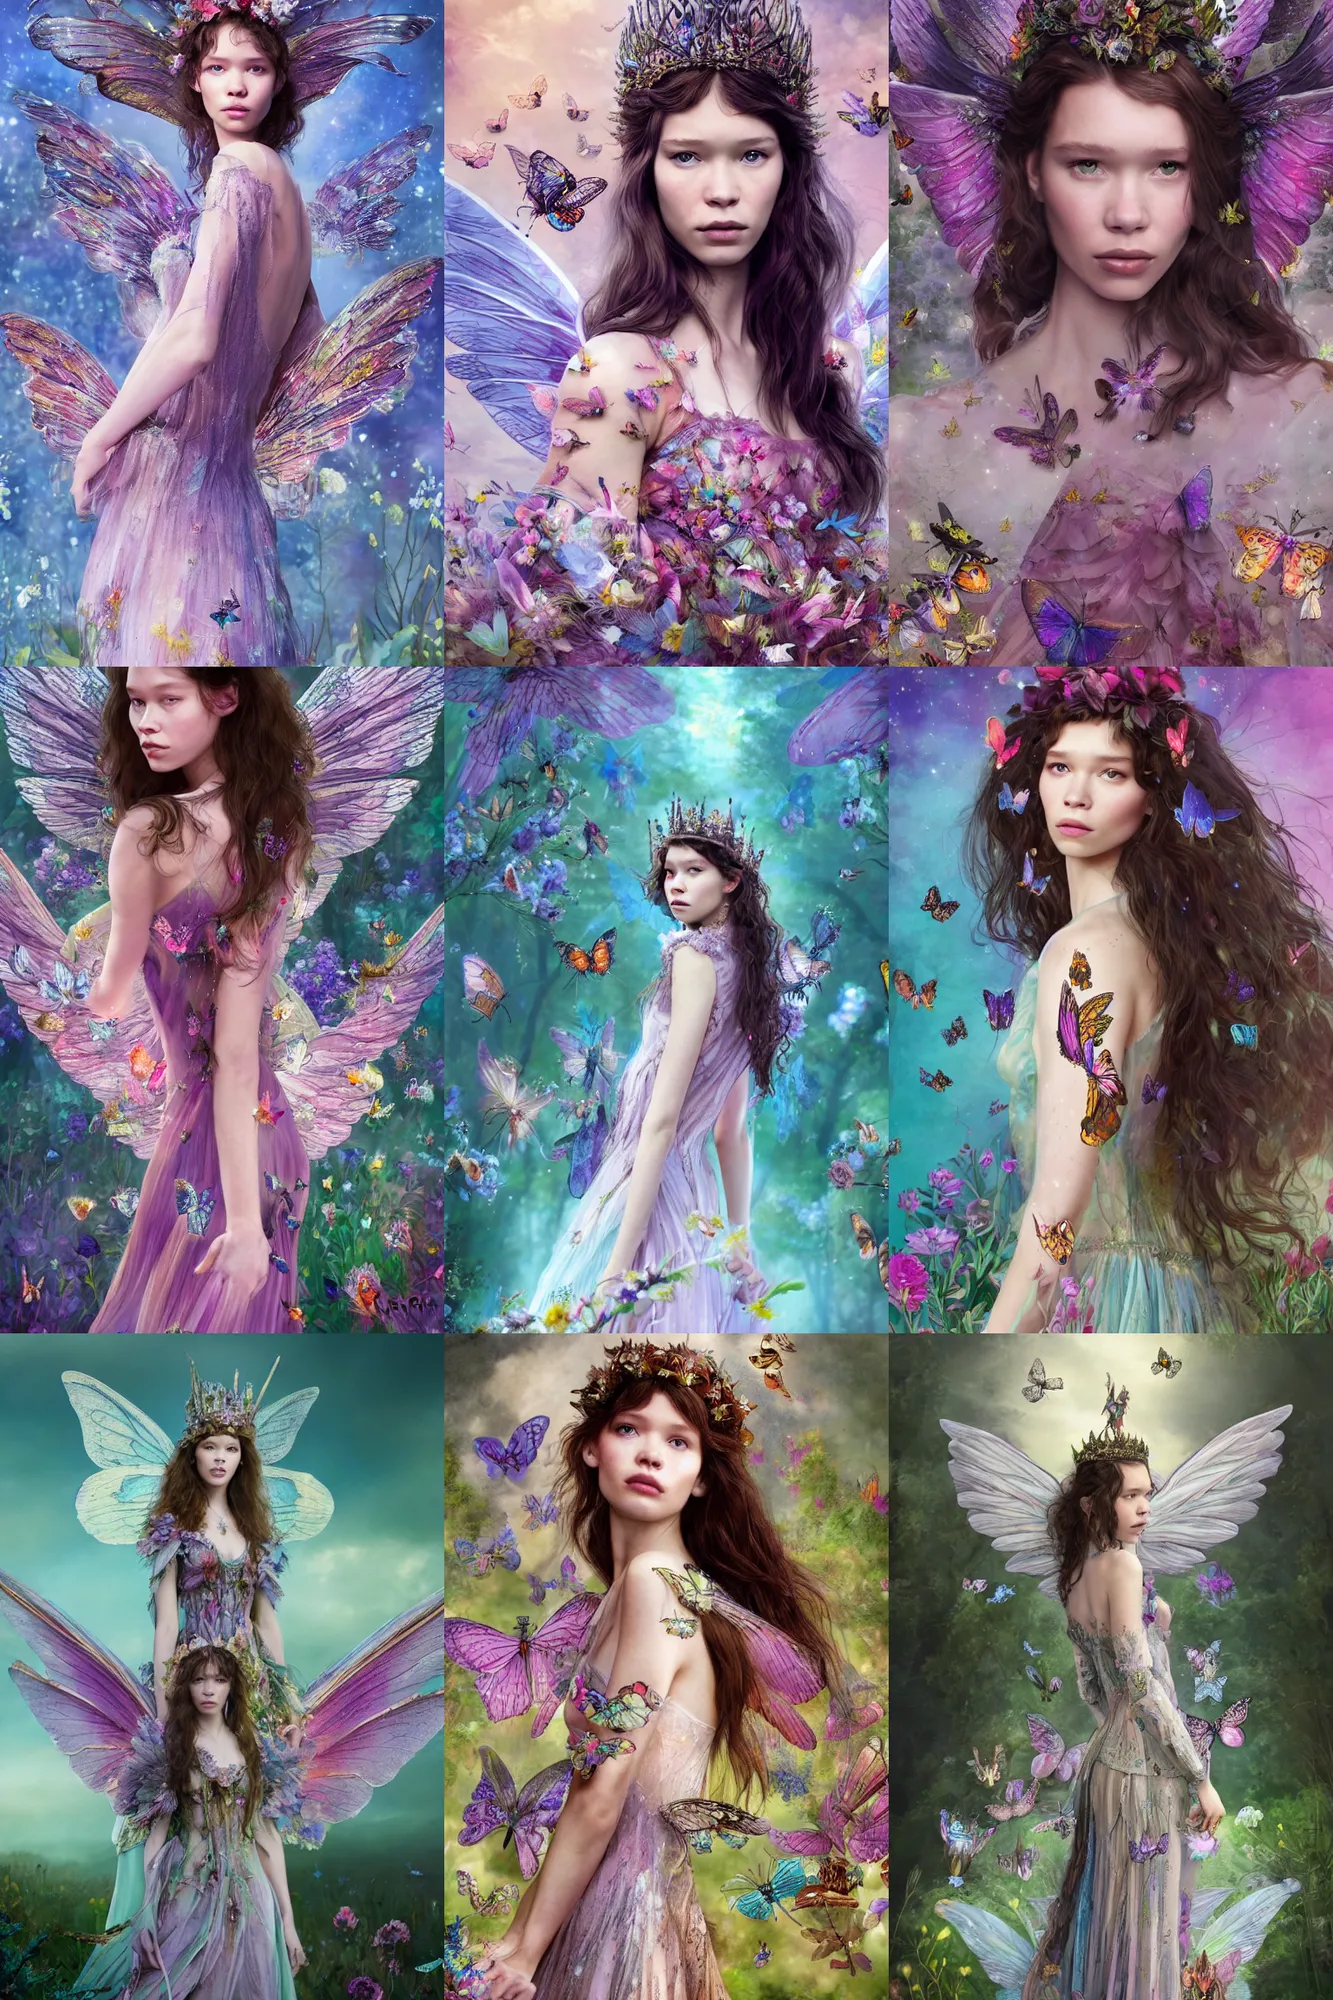 Prompt: astrid berges frisbey as queen of the faries. large wings grow from her back. she is facing the camera. frontal facing. digital illustration. wearing a dress made out of flowers and butterflies. pixies surround her. trending on art station, low detail, dreamy, vivid colours.